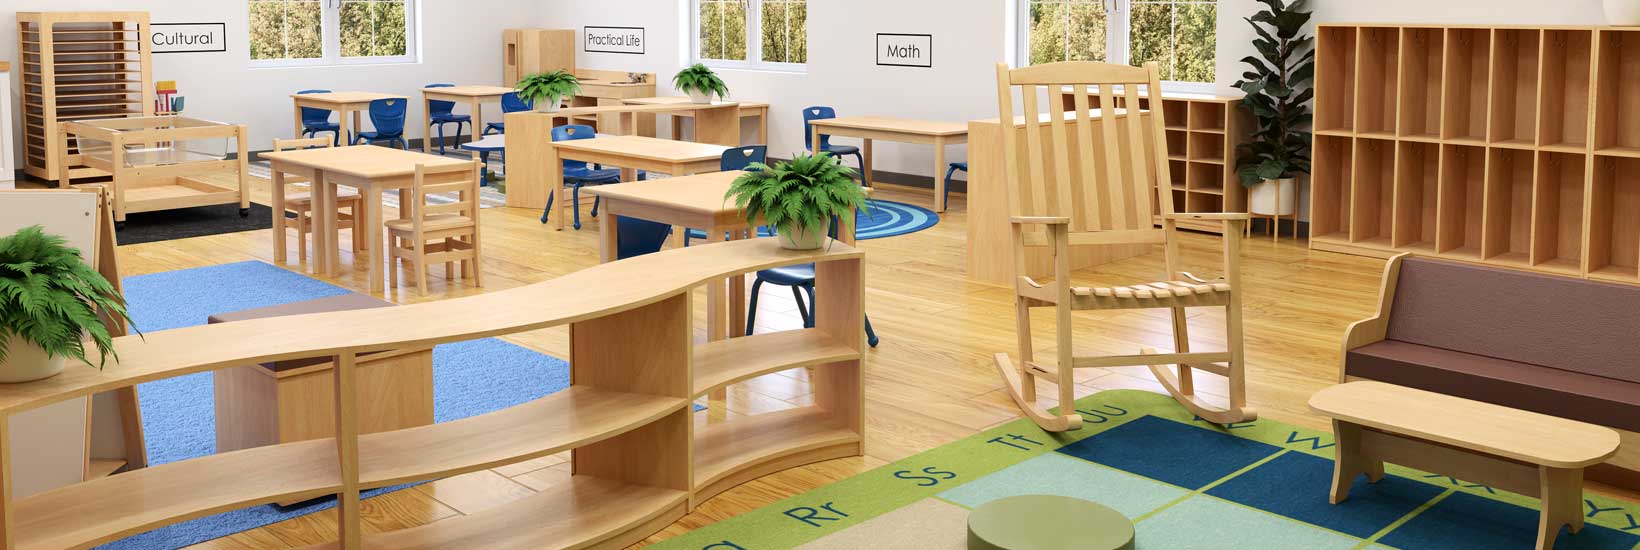 Early Childhood Montessori Space View 3